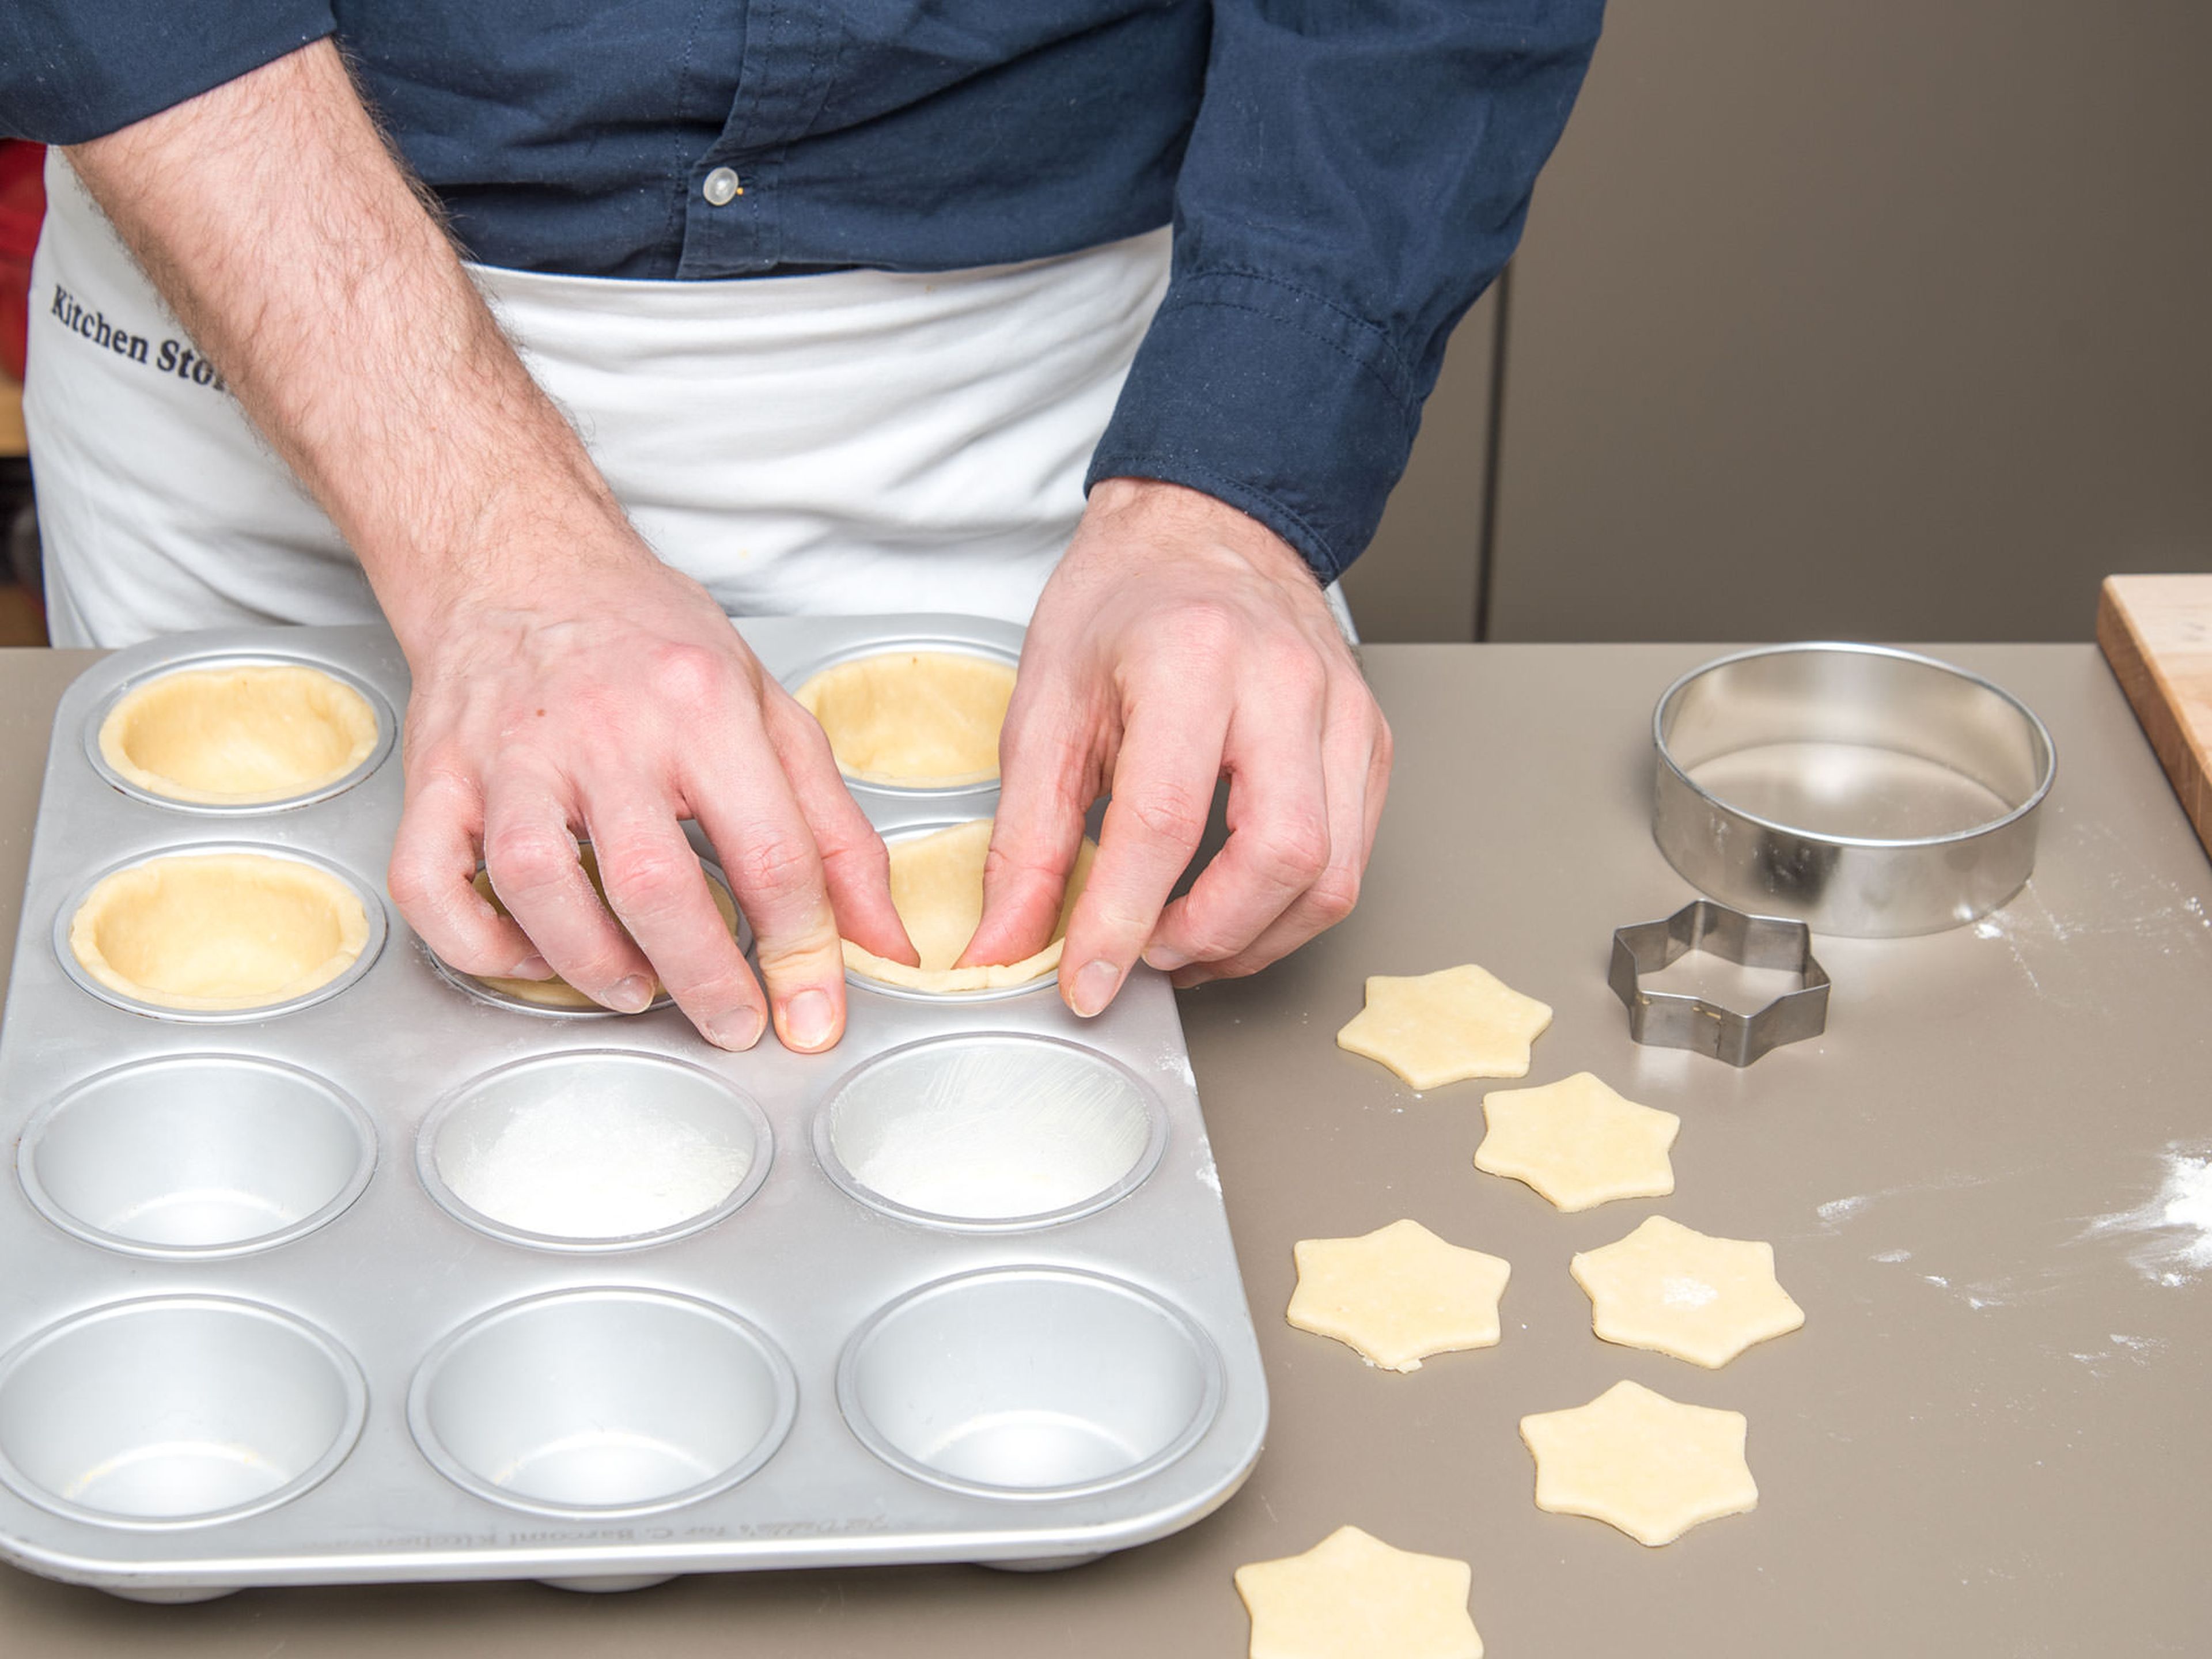 Preheat oven to 170°C/340°F. Grease and flour a muffin tin. Flour your working surface and roll out the chilled dough until it’s approx. 3-mm/0.1-in. thick. Use a round cookie cutter to cut out circles that are big enough to cover the bottom and the sides of each muffin tin. Cut out the same amount of stars. Place the base circles into the muffin tin and slightly press down to make them fit the tin.